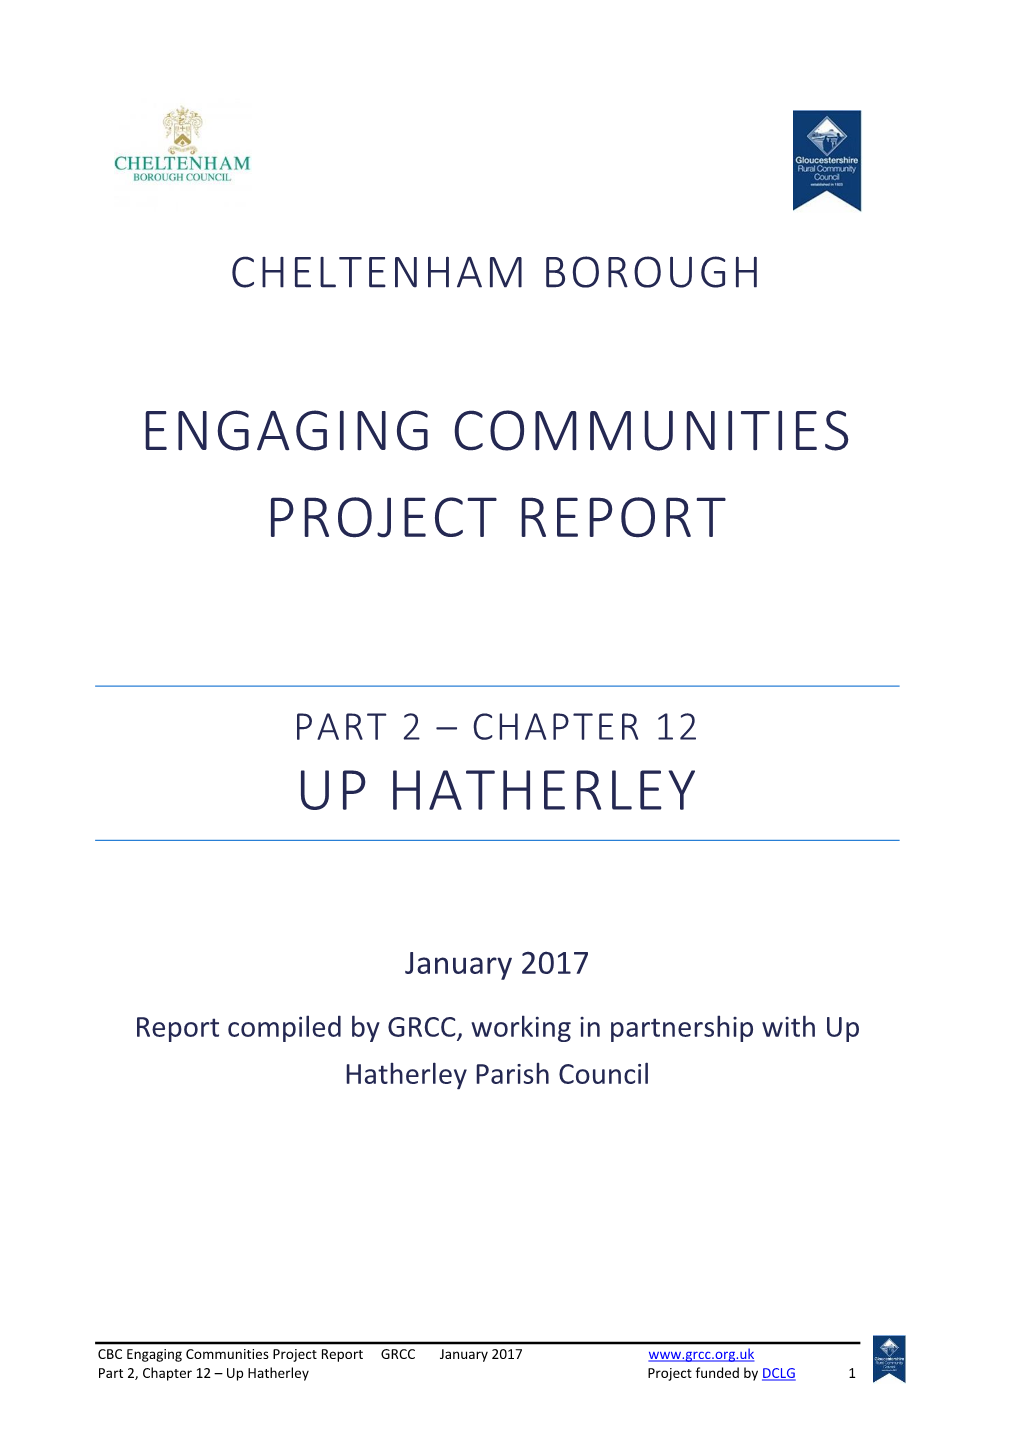 Engaging Communities Project Report up Hatherley